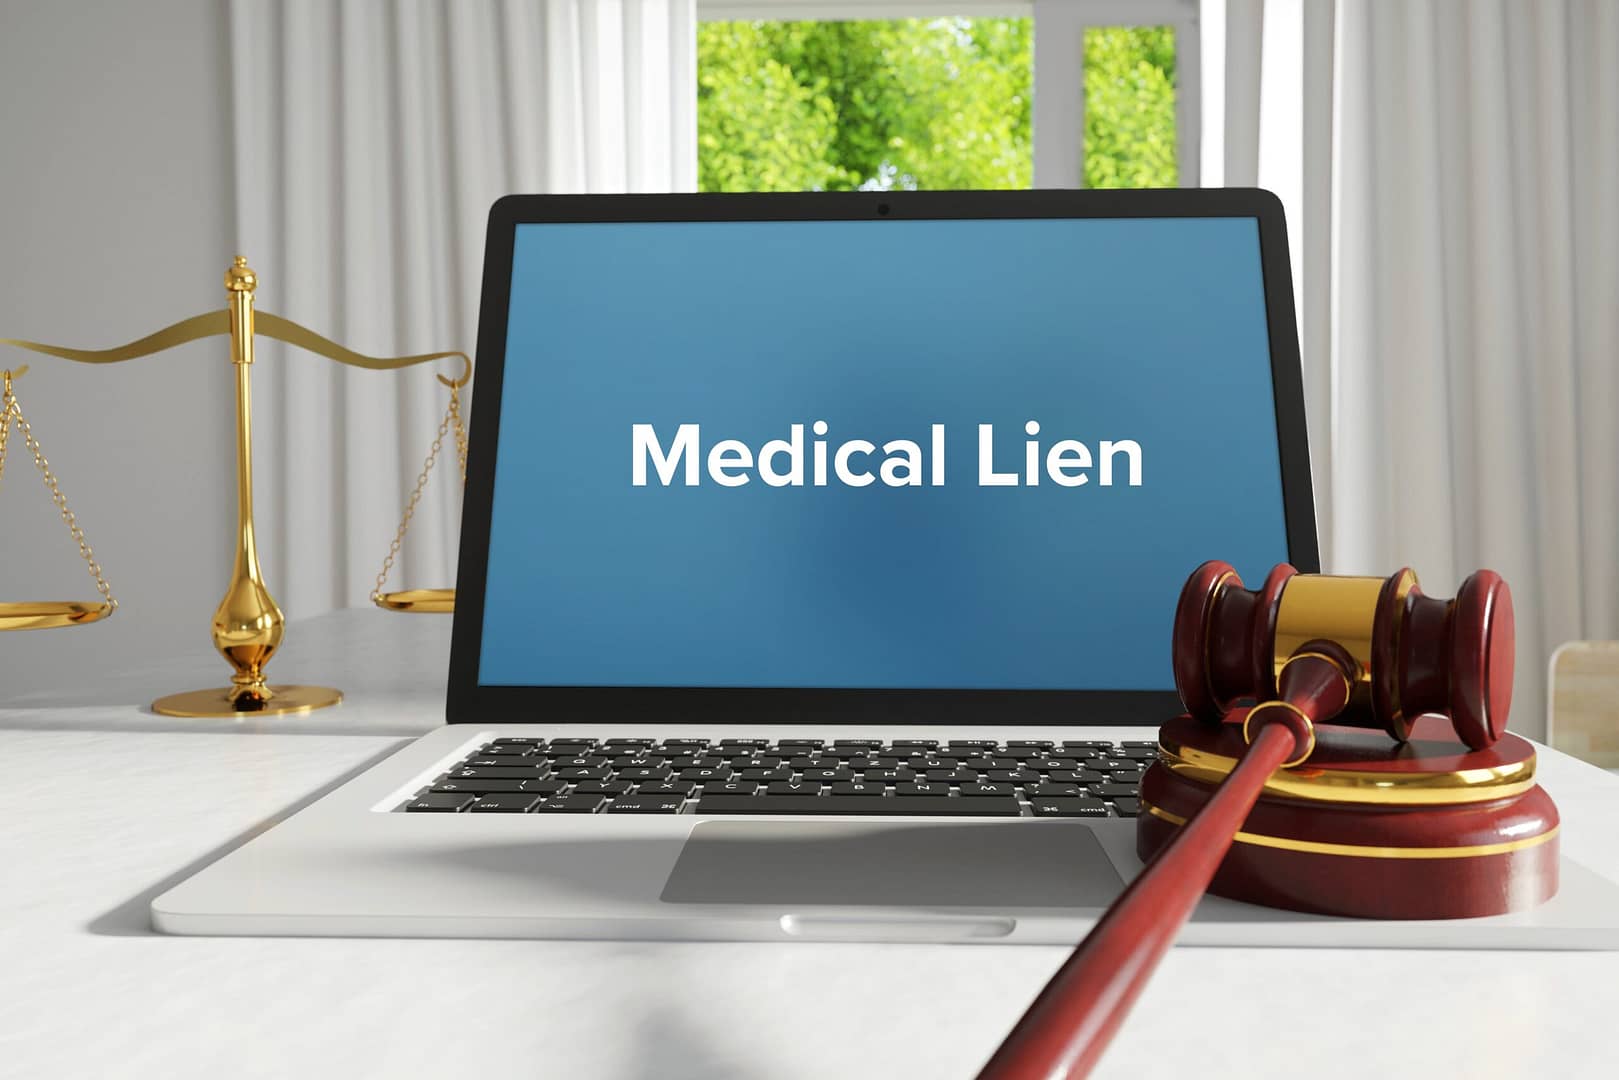 Medical Lien – Law, Judgment, Web. Laptop in the office with term on the screen. Hammer, Libra, Lawyer. Hospital Liens